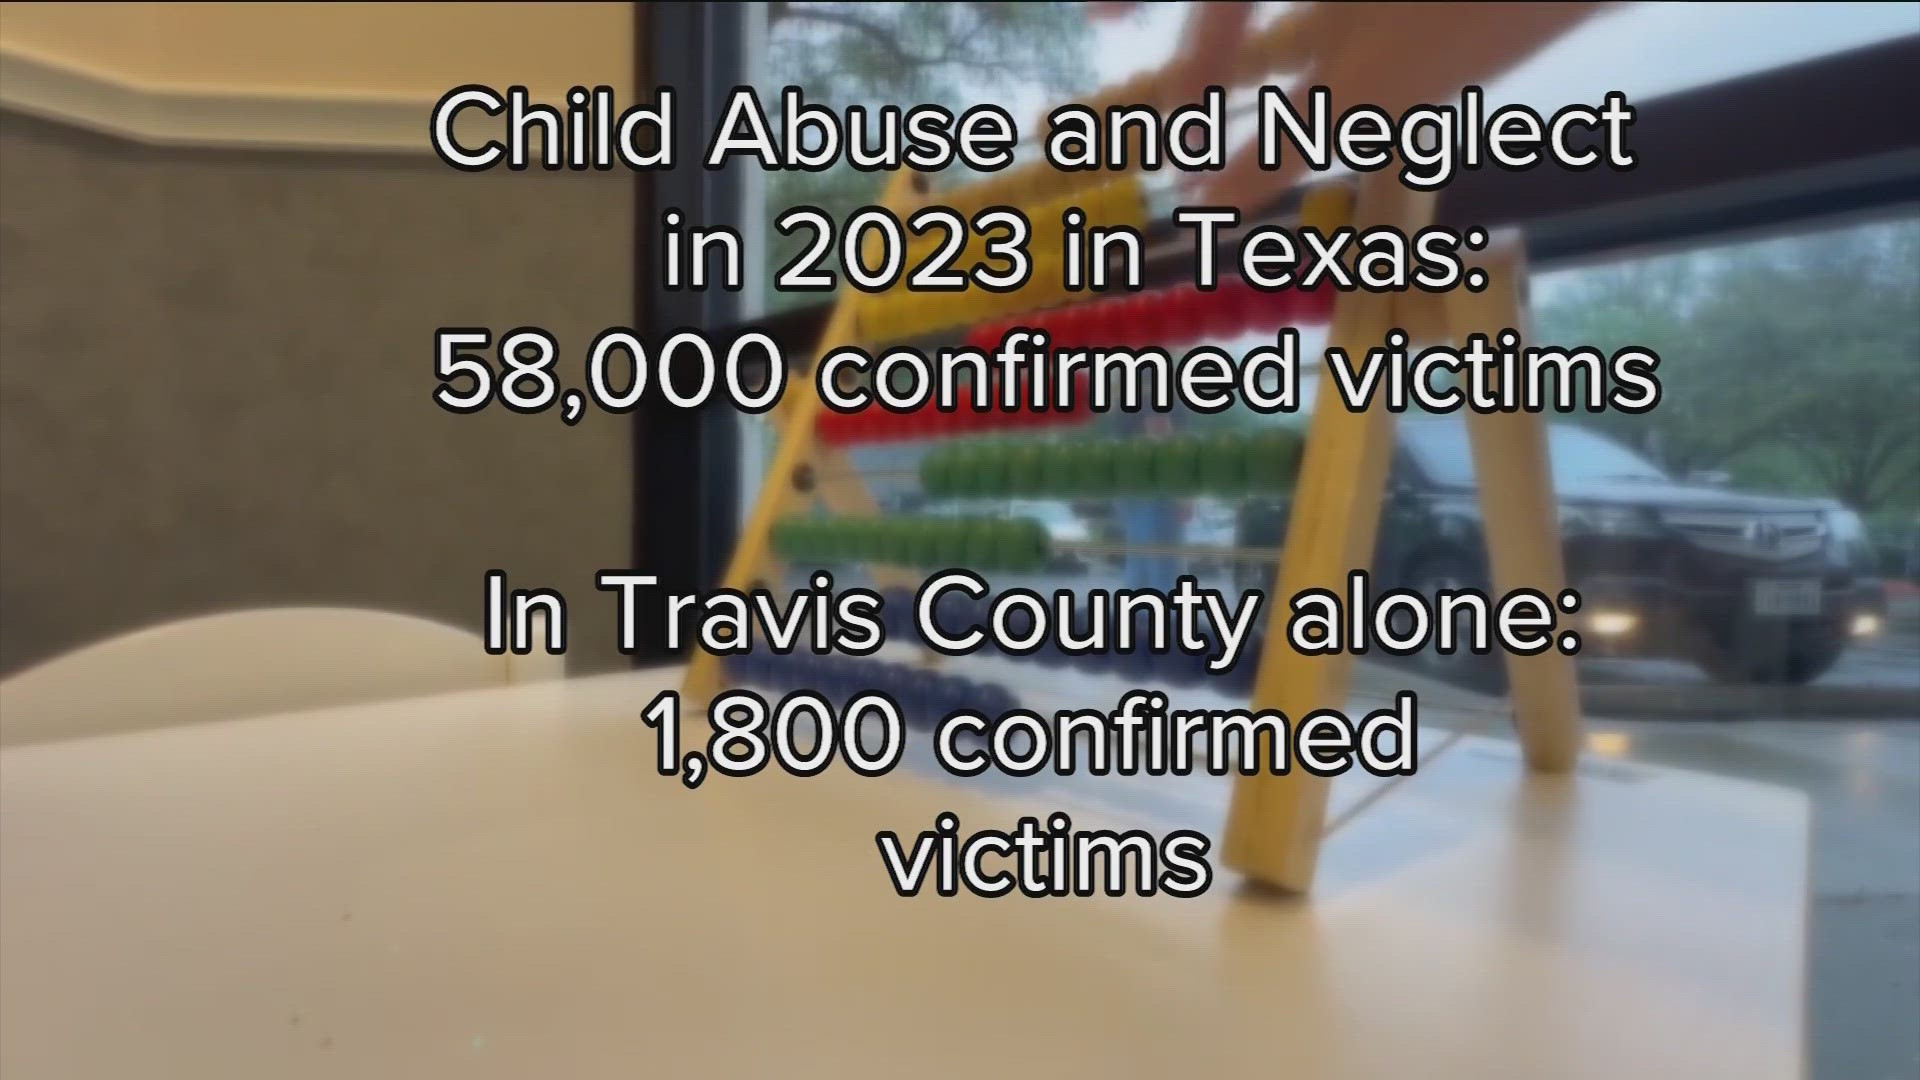 April is National Child Abuse Prevention Month, a time when we can learn what we can do better as a community to spot child abuse and report it.